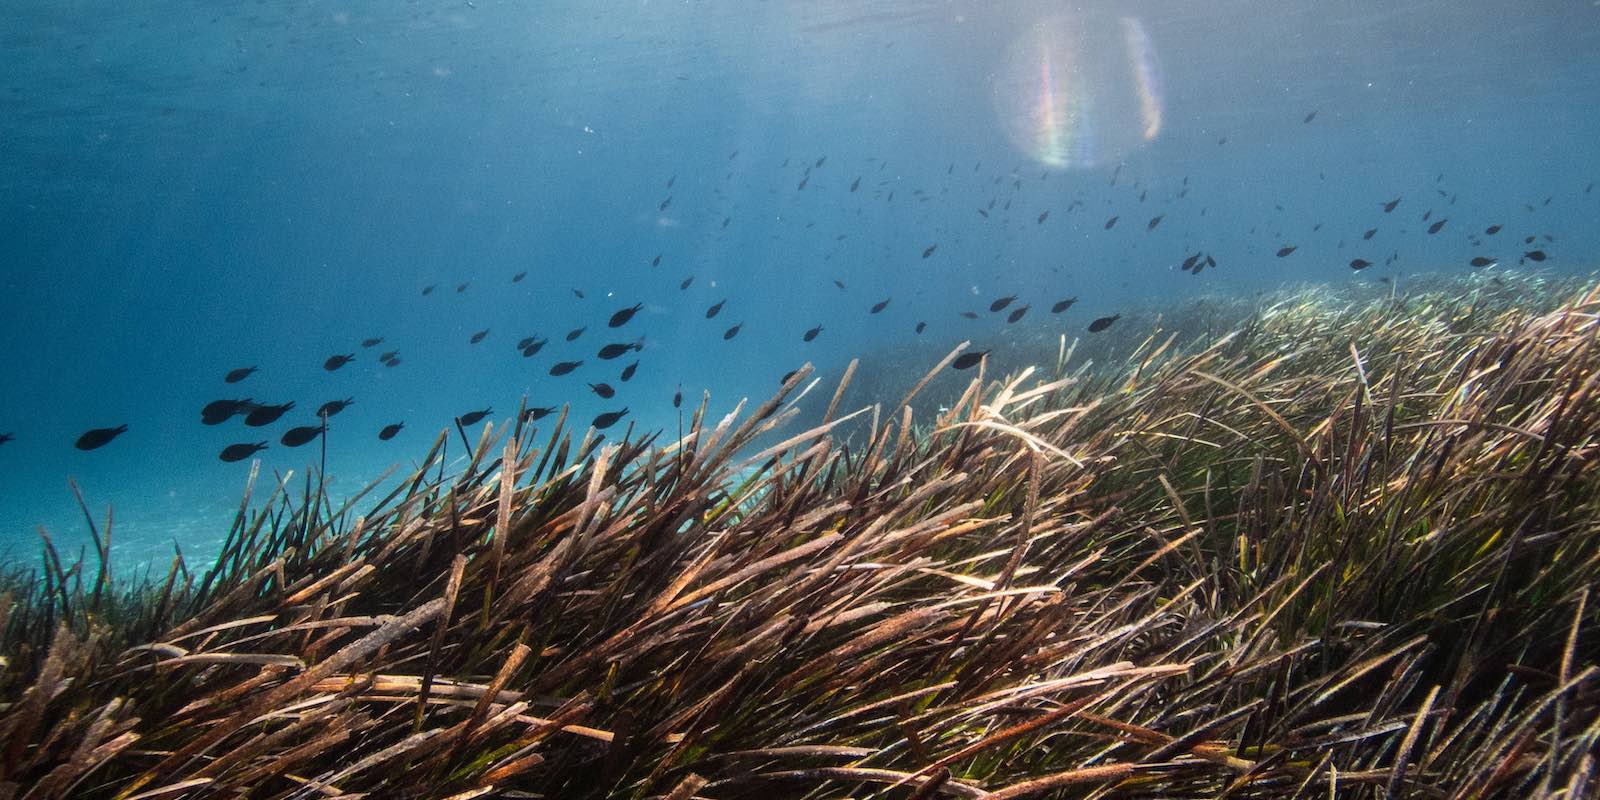 a group of small fishes and seagrass under the blue sea